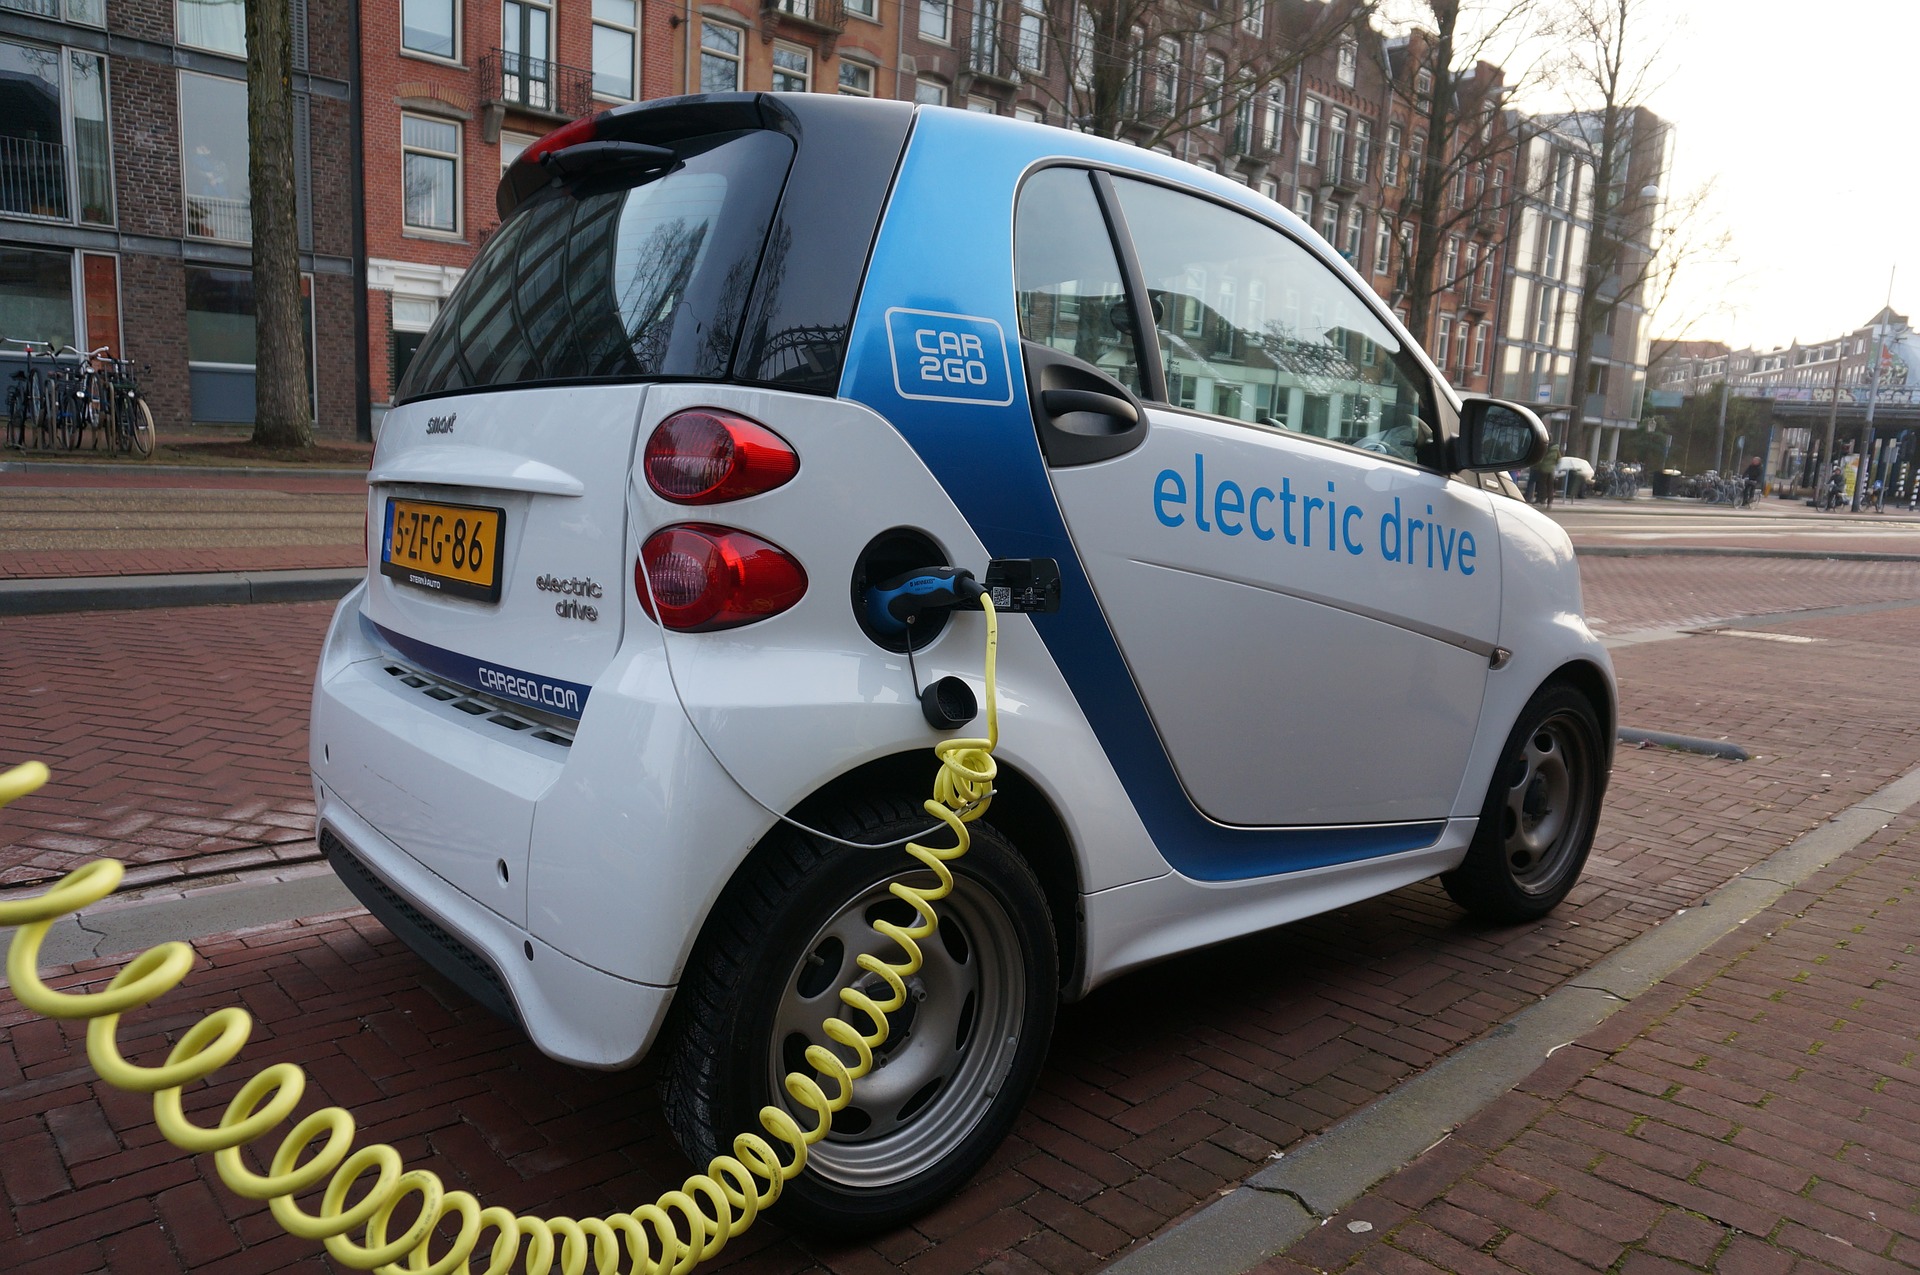 Latest Electric Car News That You Should Know